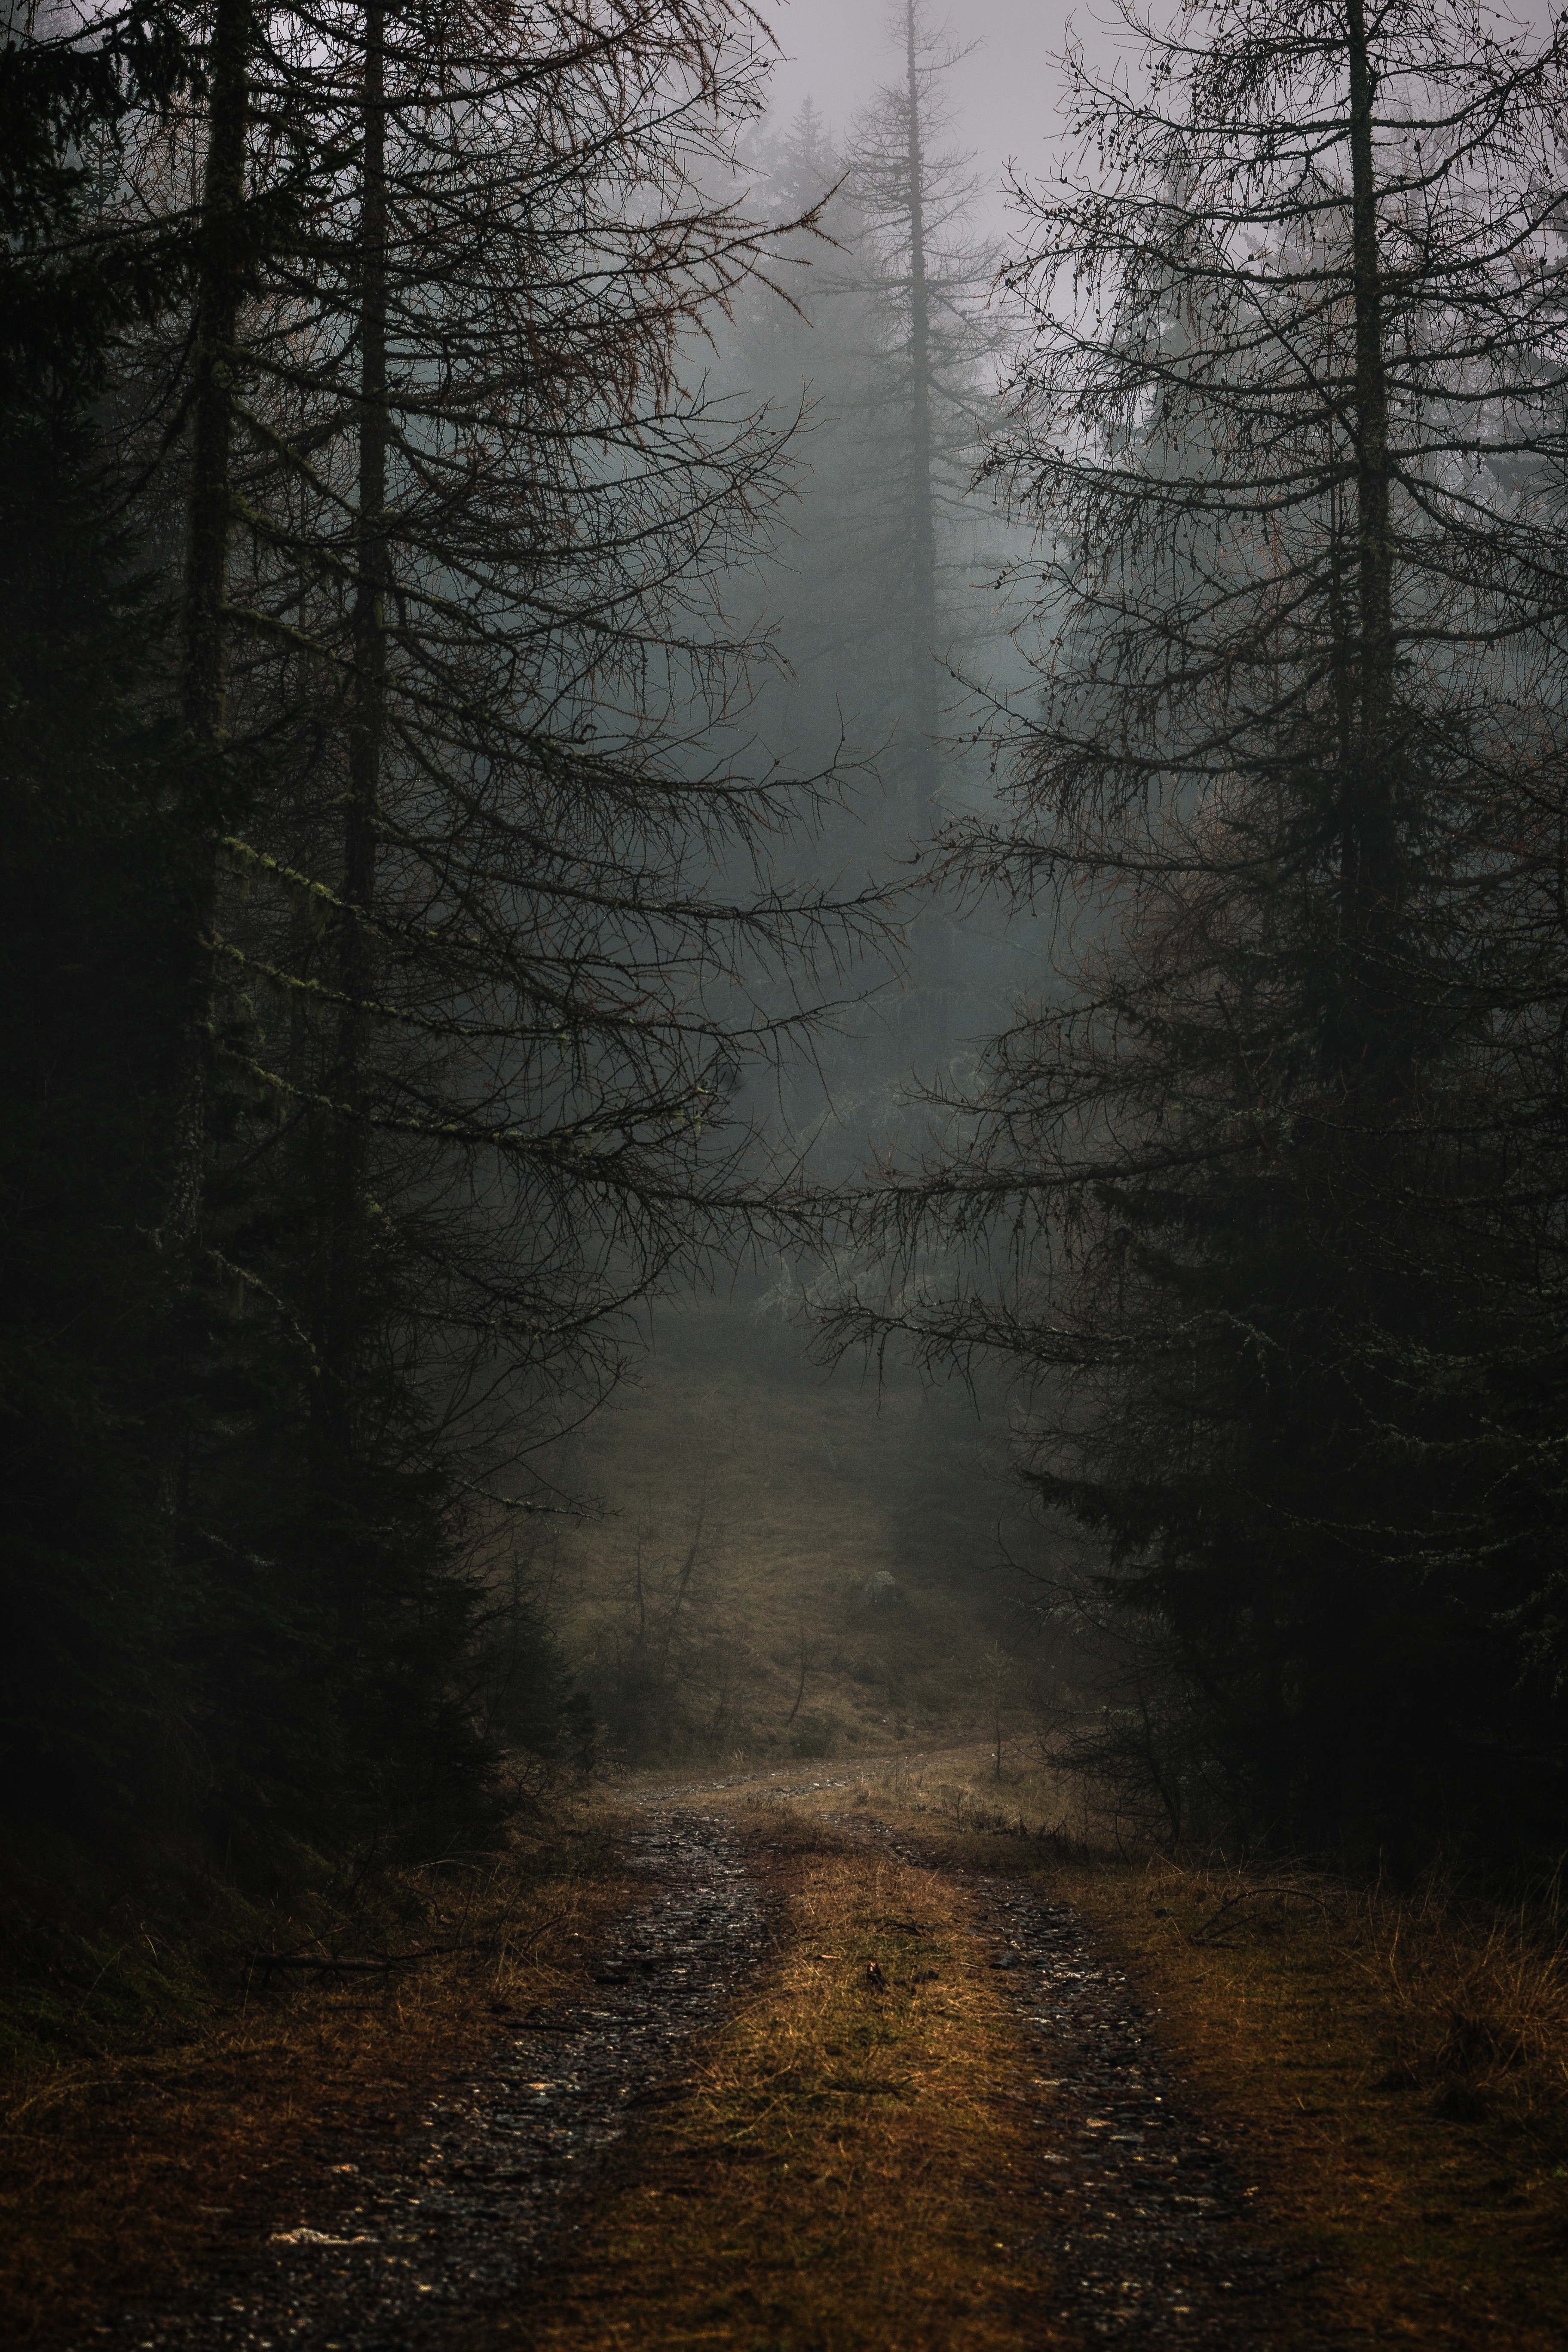 fog, autumn, gloomy, nature, trees, forest, branches, path